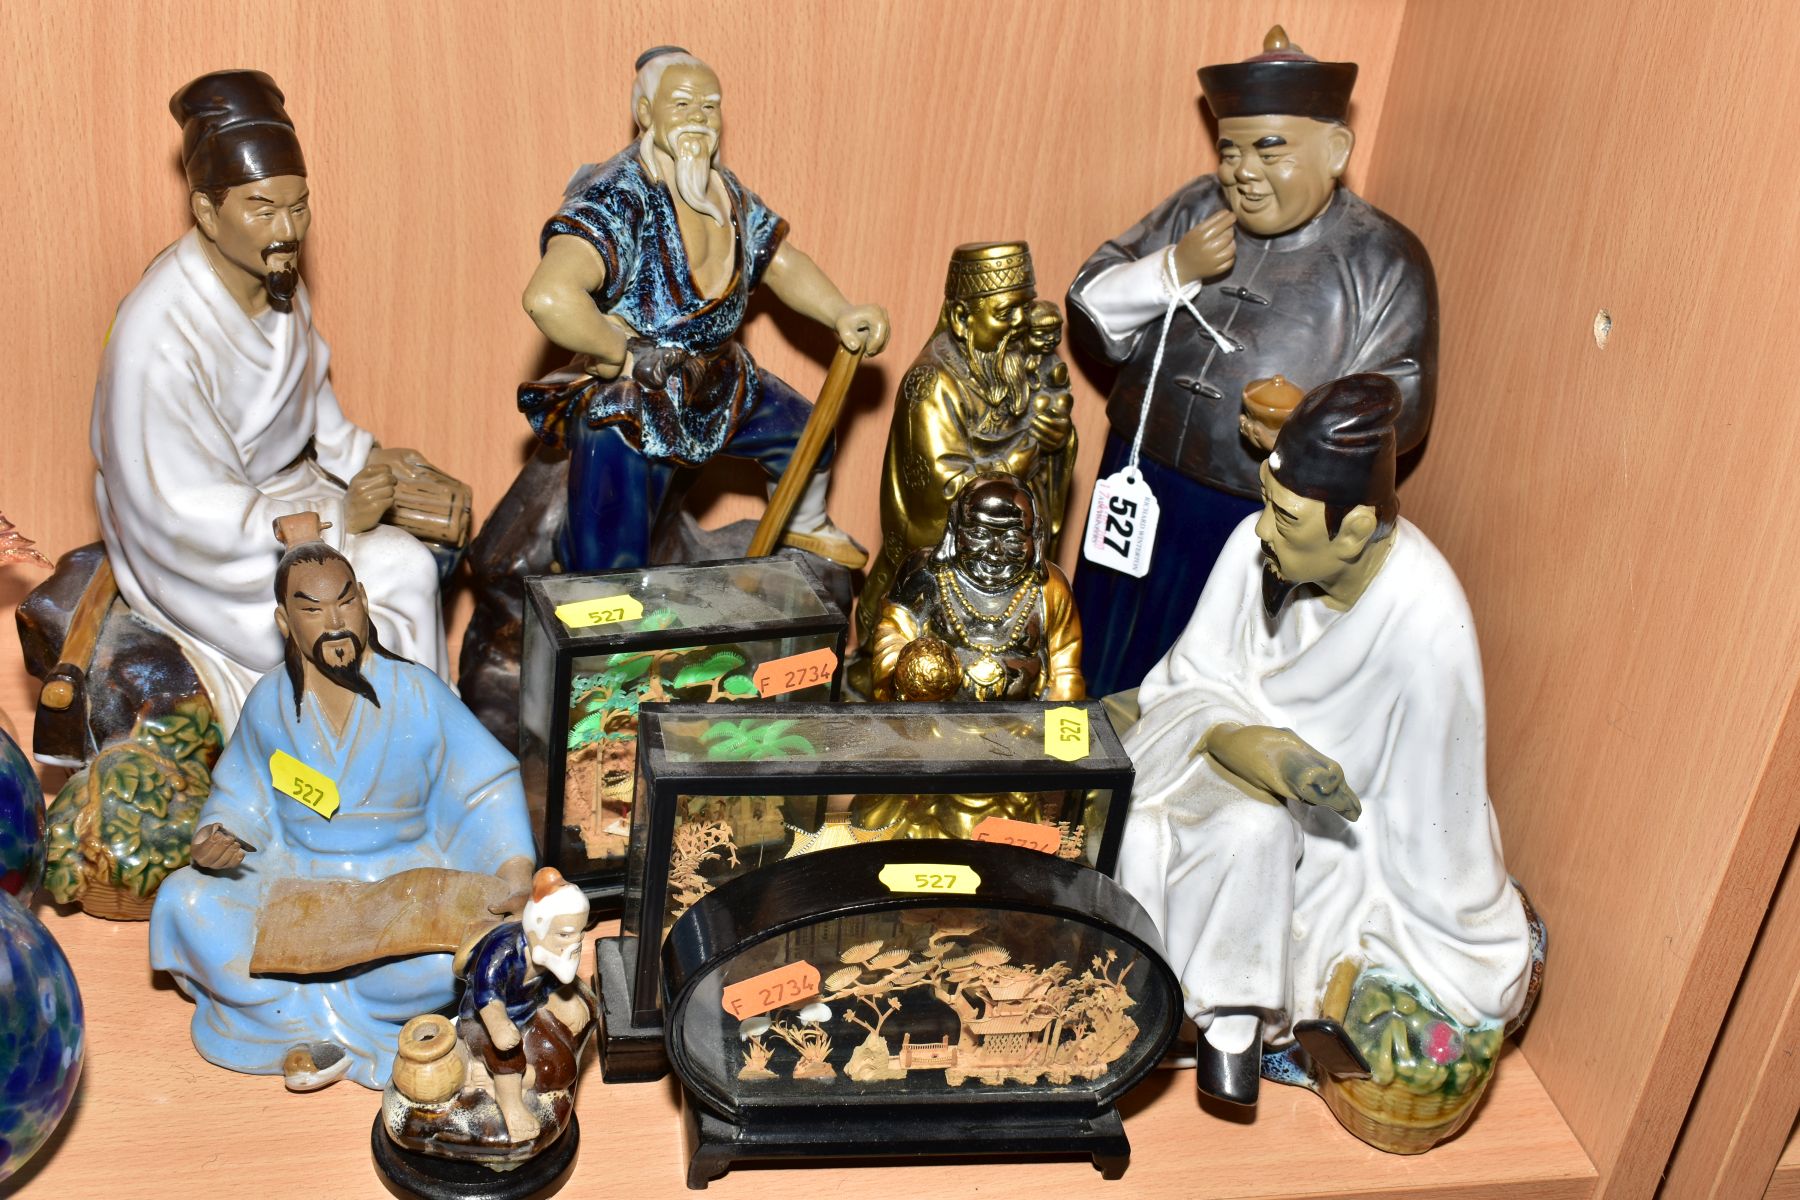 A GROUP OF JAPANESE CERAMIC FIGURES, including two seated scholars, a seated scribe, man with axe,